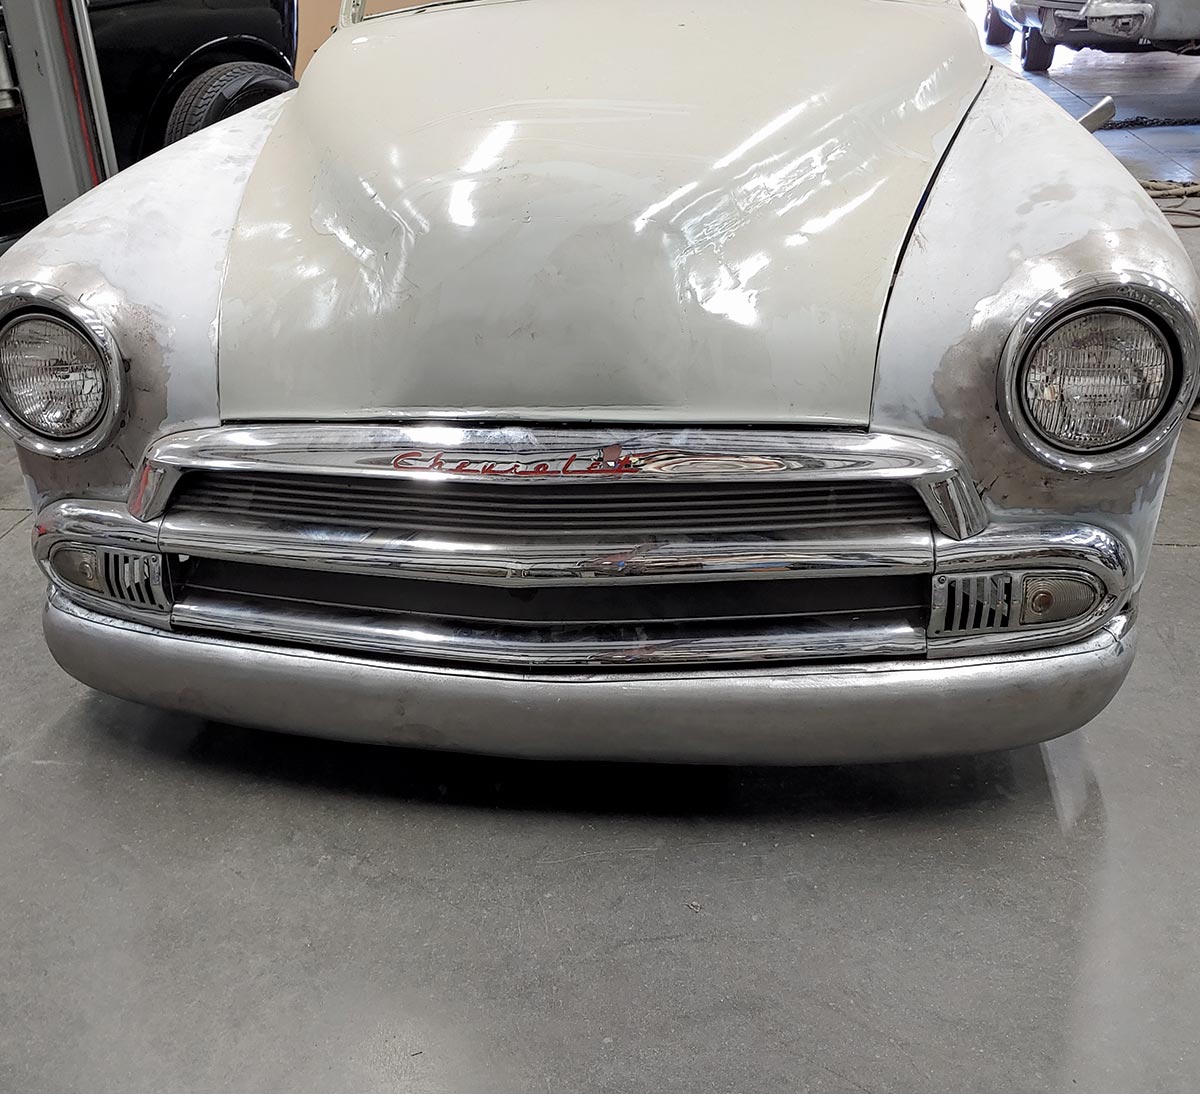 The headlights and front bumper improve the already-clean design of the ’51 Chevrolet. The mildly pancaked and filled hood adds a modern profile to the front sheetmetal.